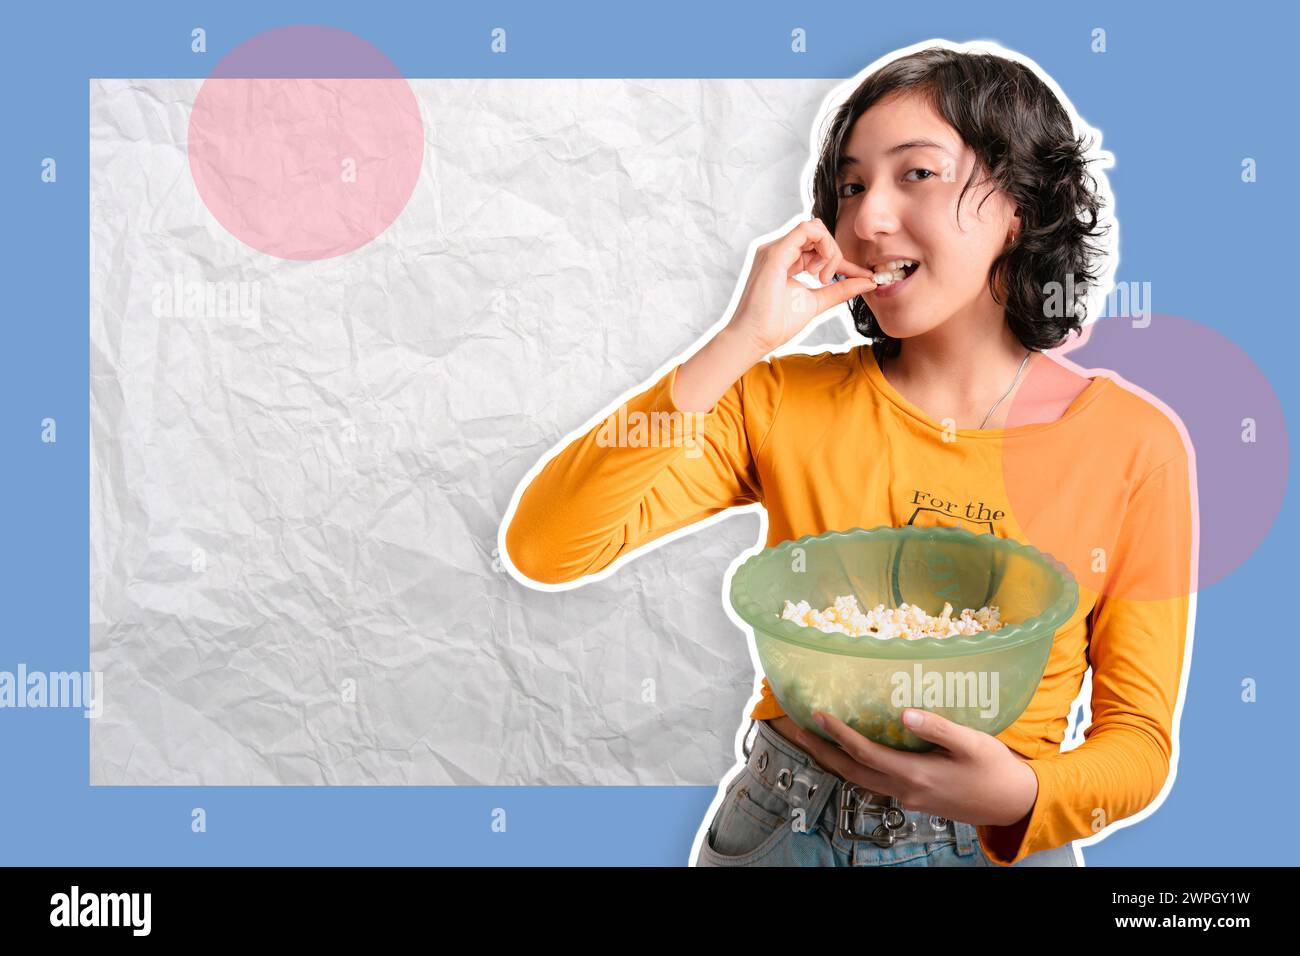 Creative photo, collage, young girl on a colorful background makes expressions, she is eating popcorn, banner for social networks. Stock Photo